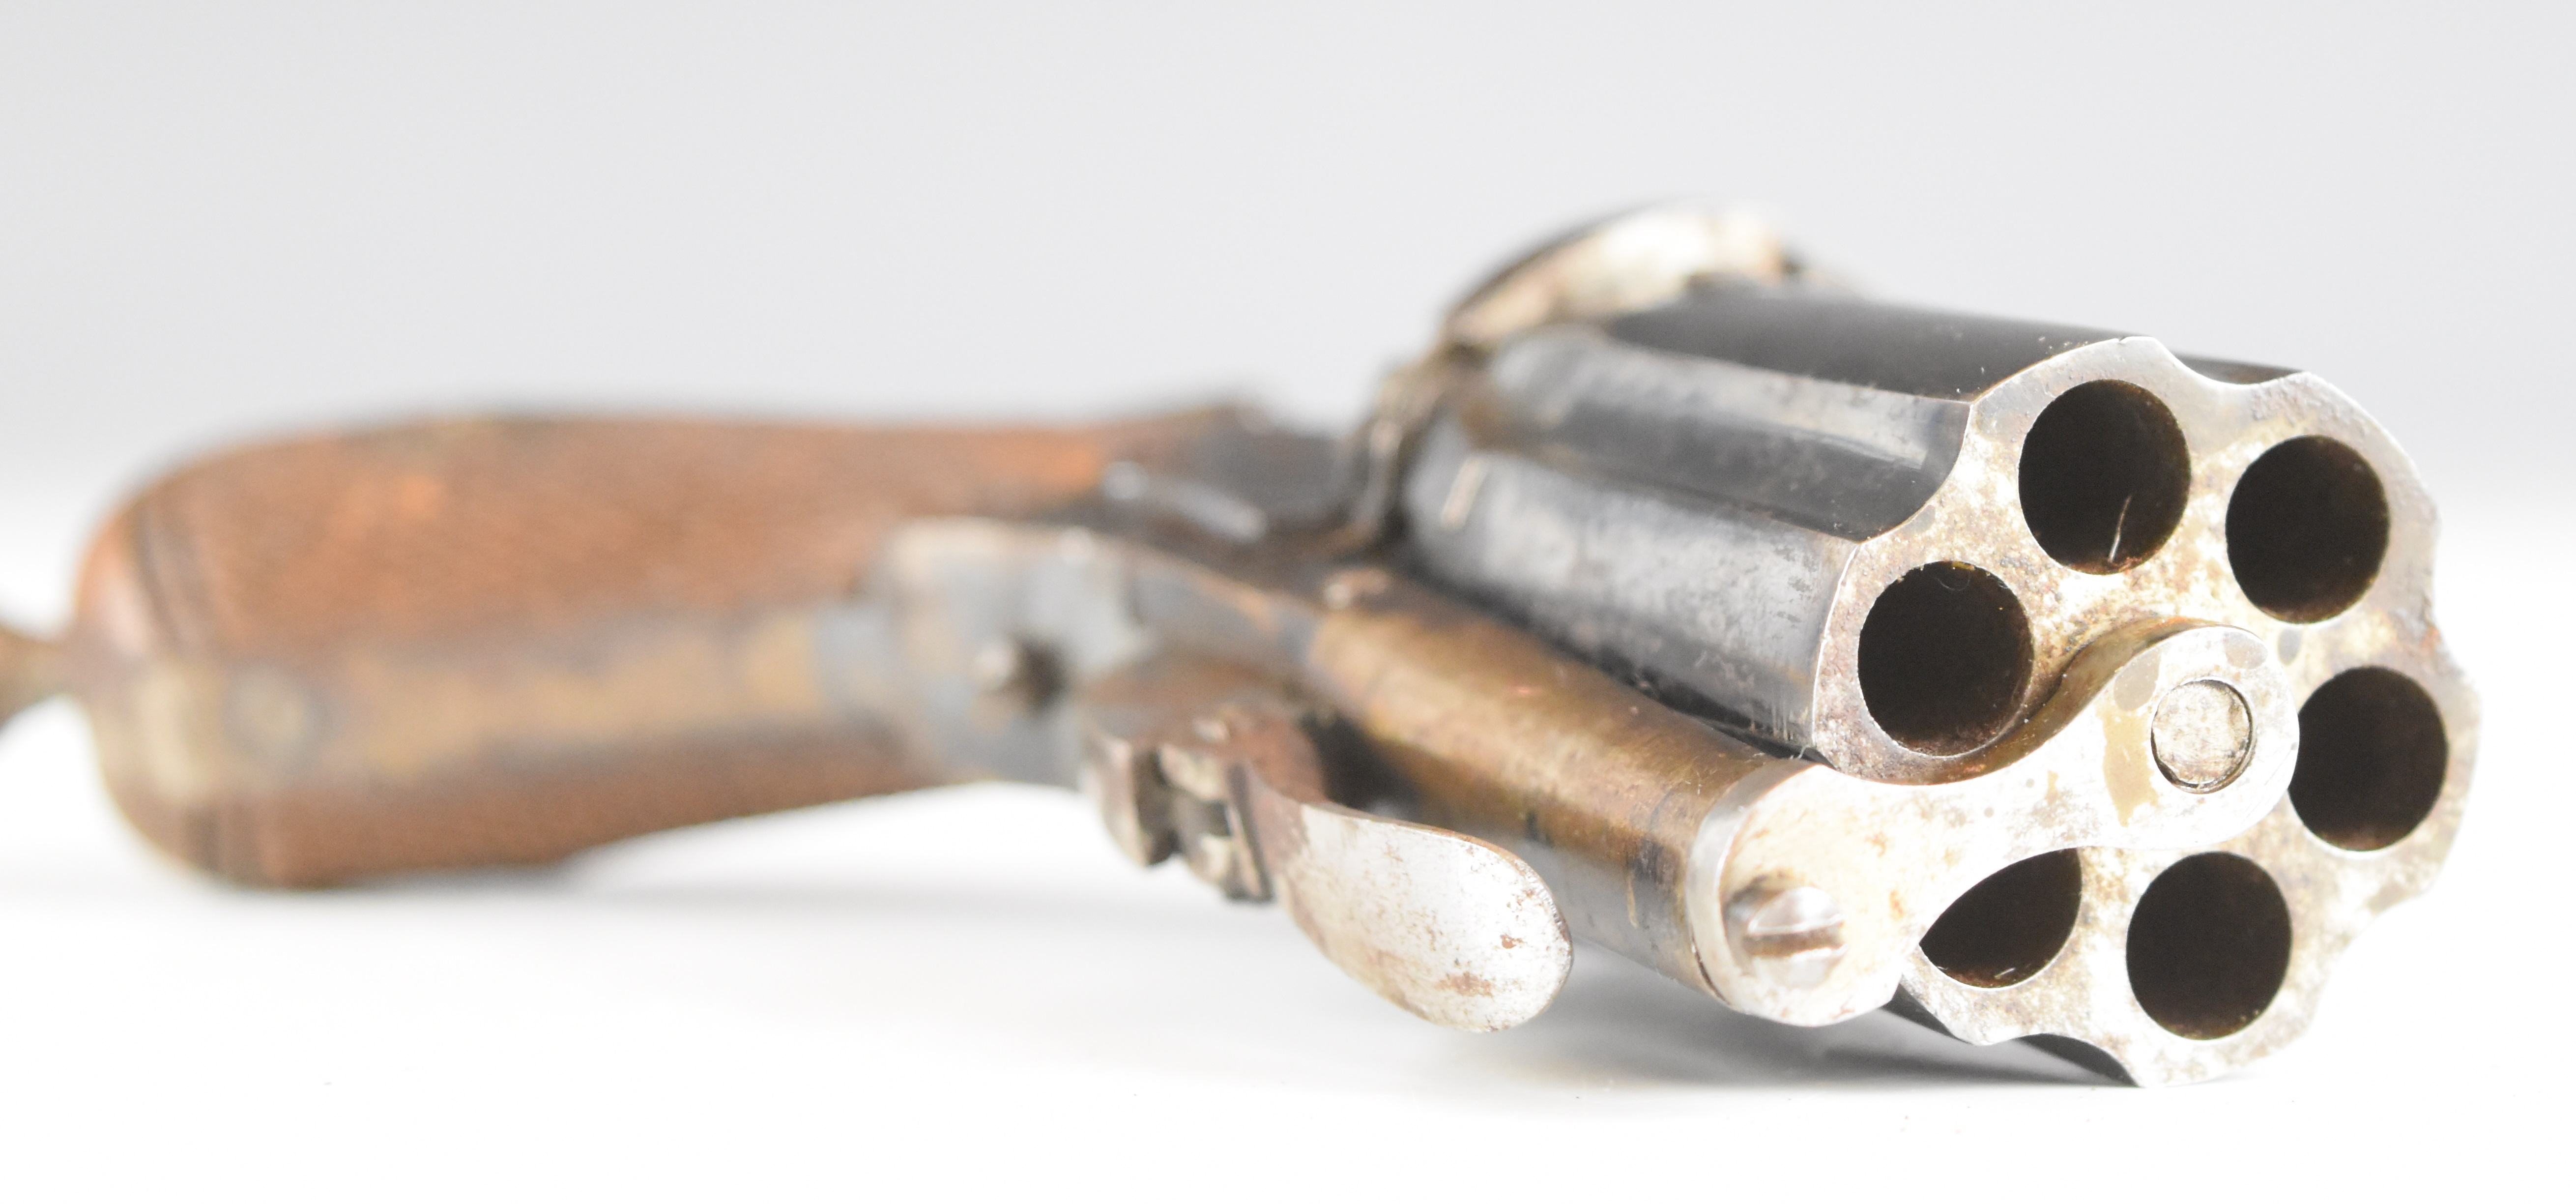 Unnamed 5mm six-shot pinfire hammer action pepperbox pistol/ revolver with chequered wooden grips, - Image 4 of 8